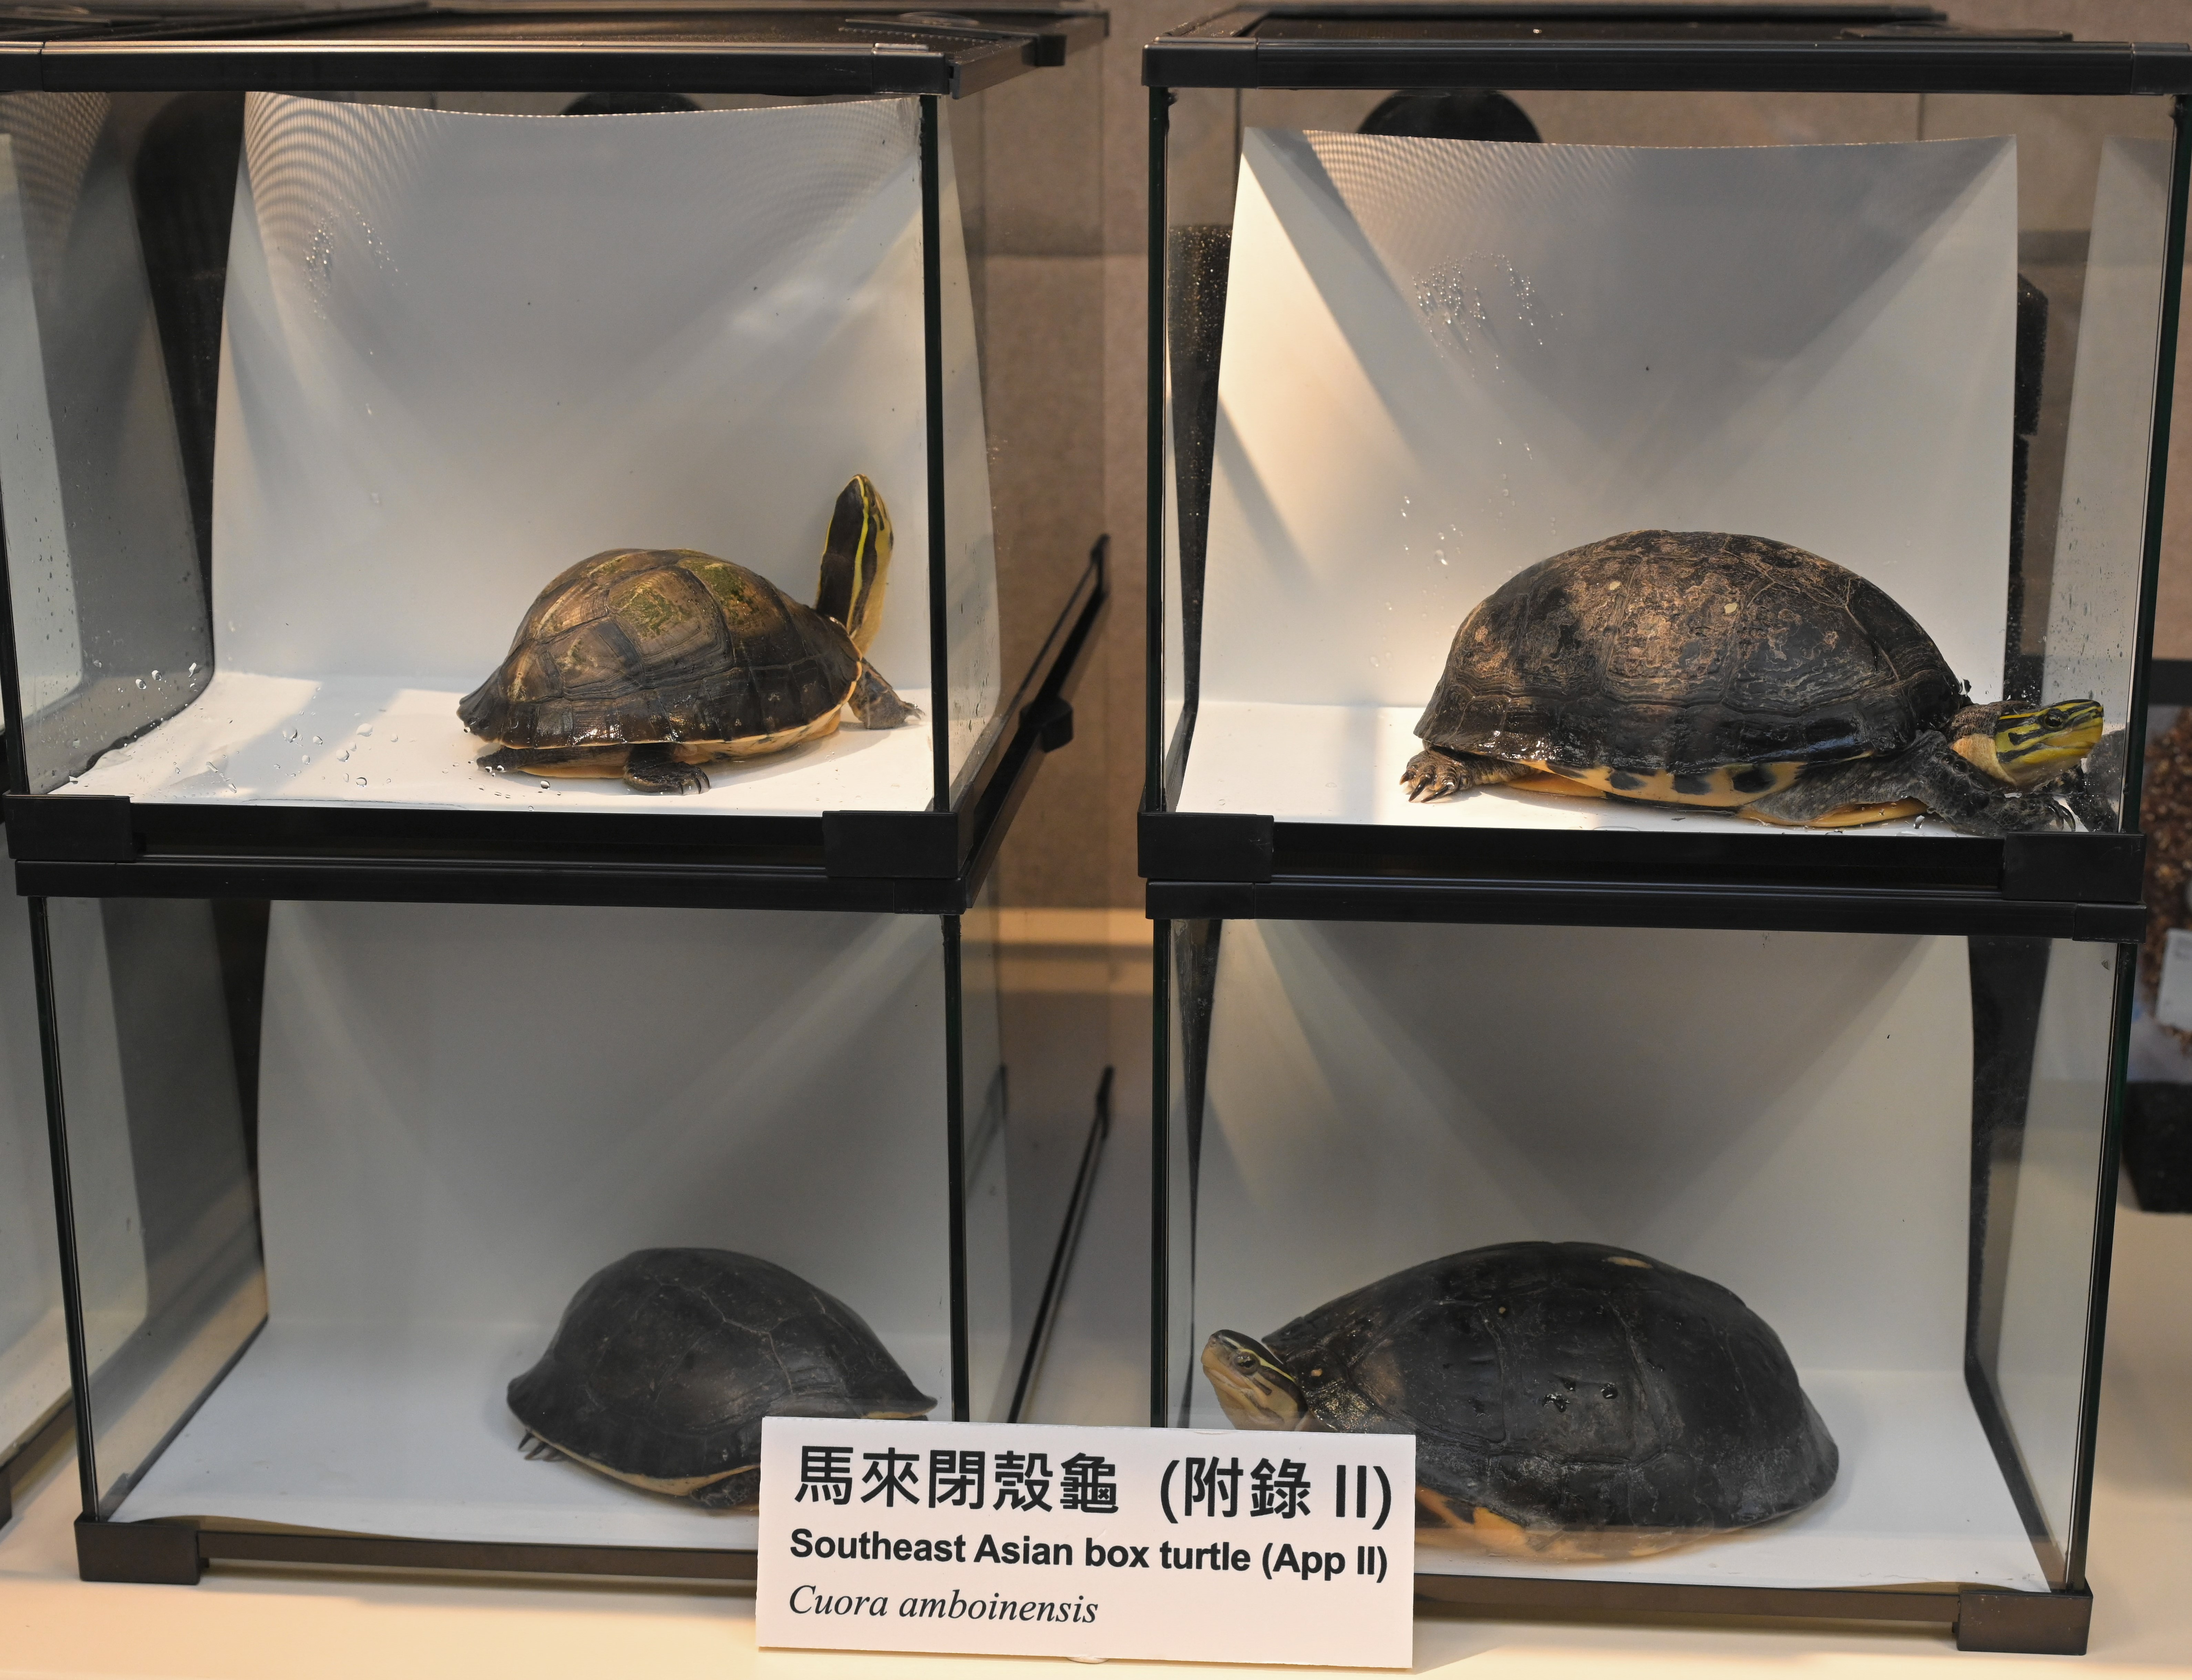 Twenty-nine specimens of endangered turtles seized in joint operation by AFCD and Police (3)